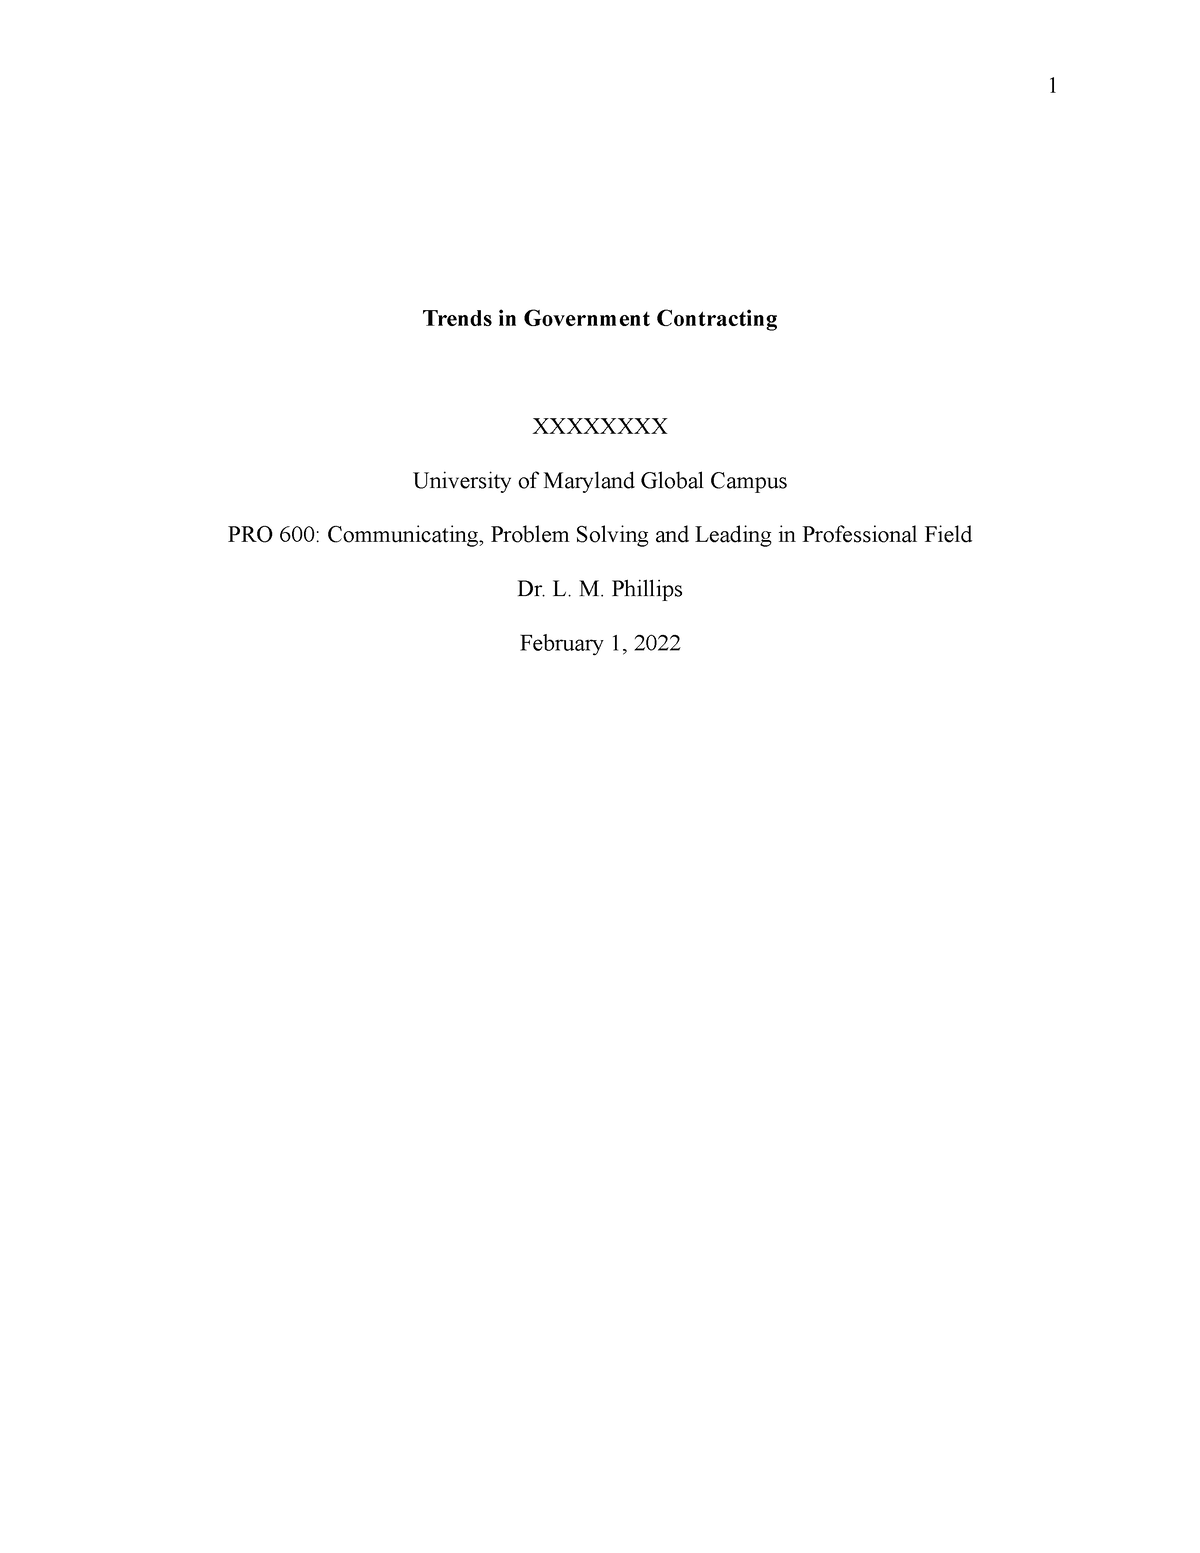 Project 2 Trends in Government Contracting Trends in Government